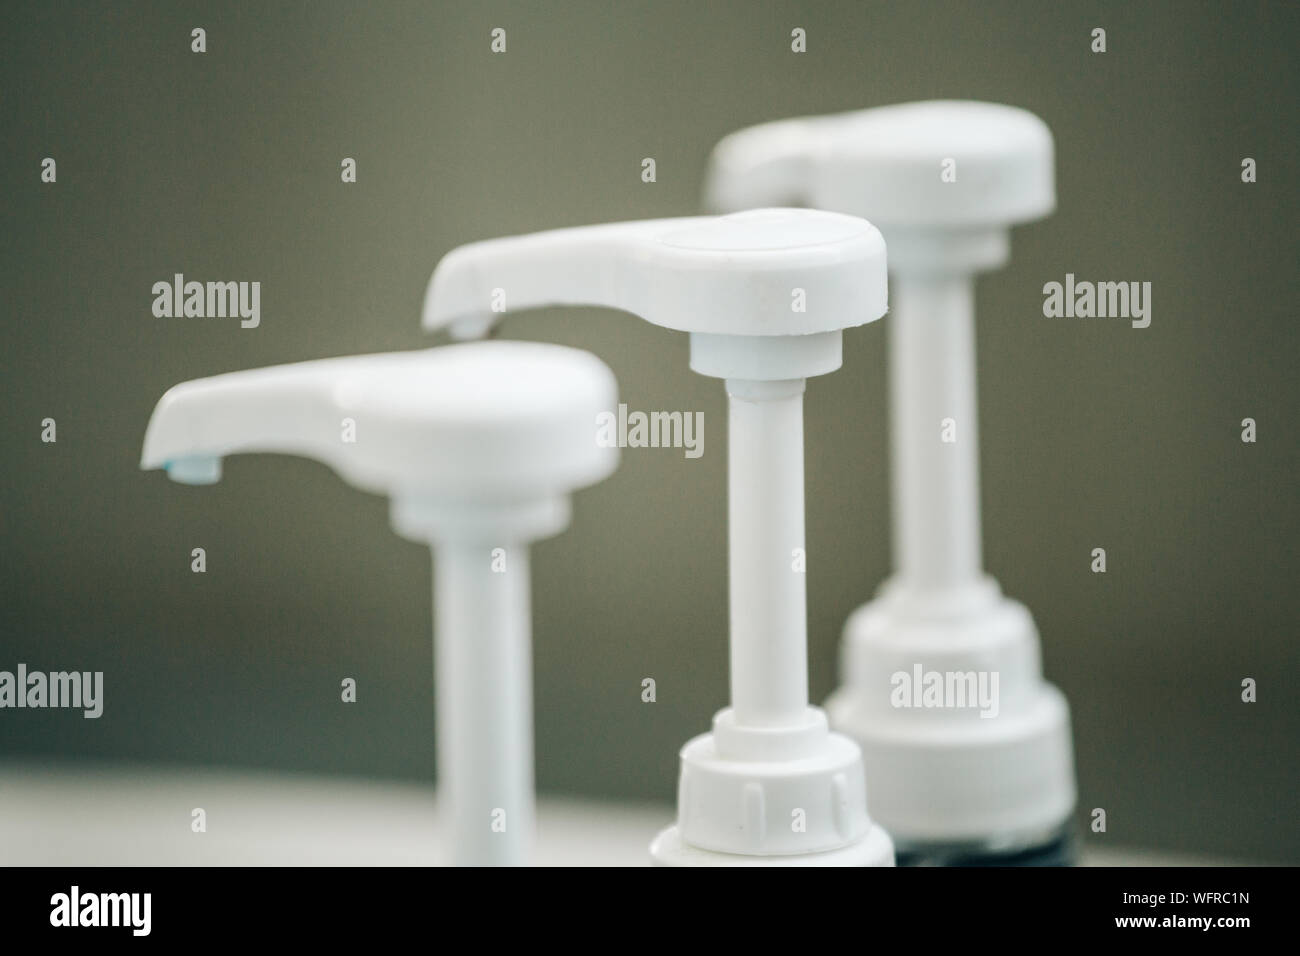 Close-up Of Soap Dispensers In Bathroom Stock Photo